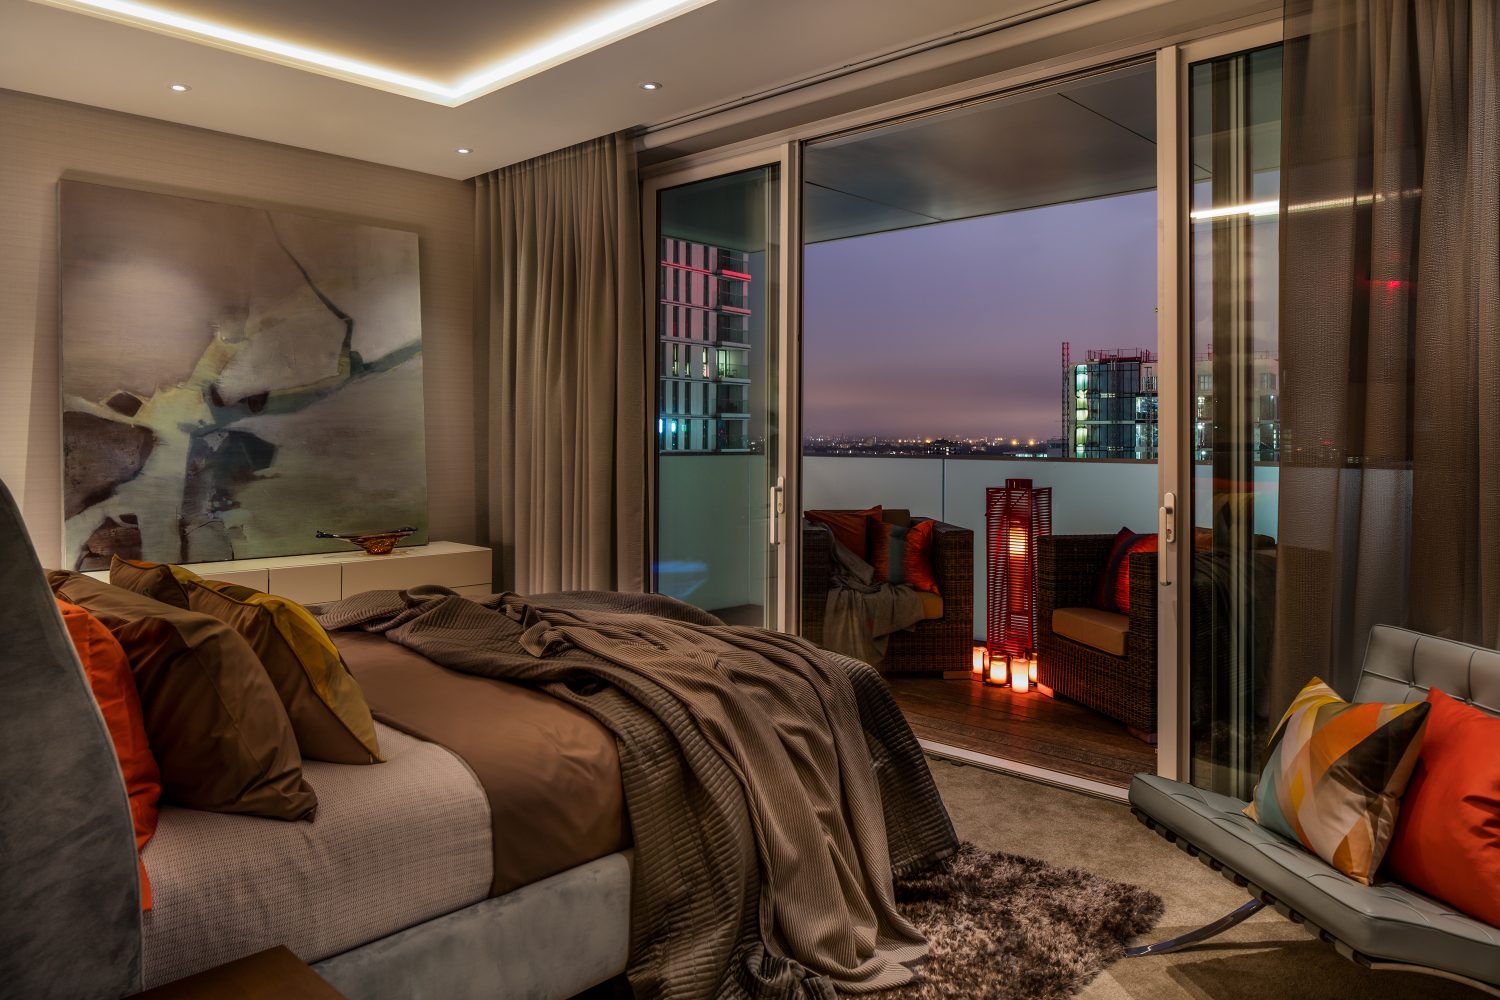 Sound & Vision by Daniel Hopwood – bedroom with a balcony and London views. Berkeley Homes, Aldgate